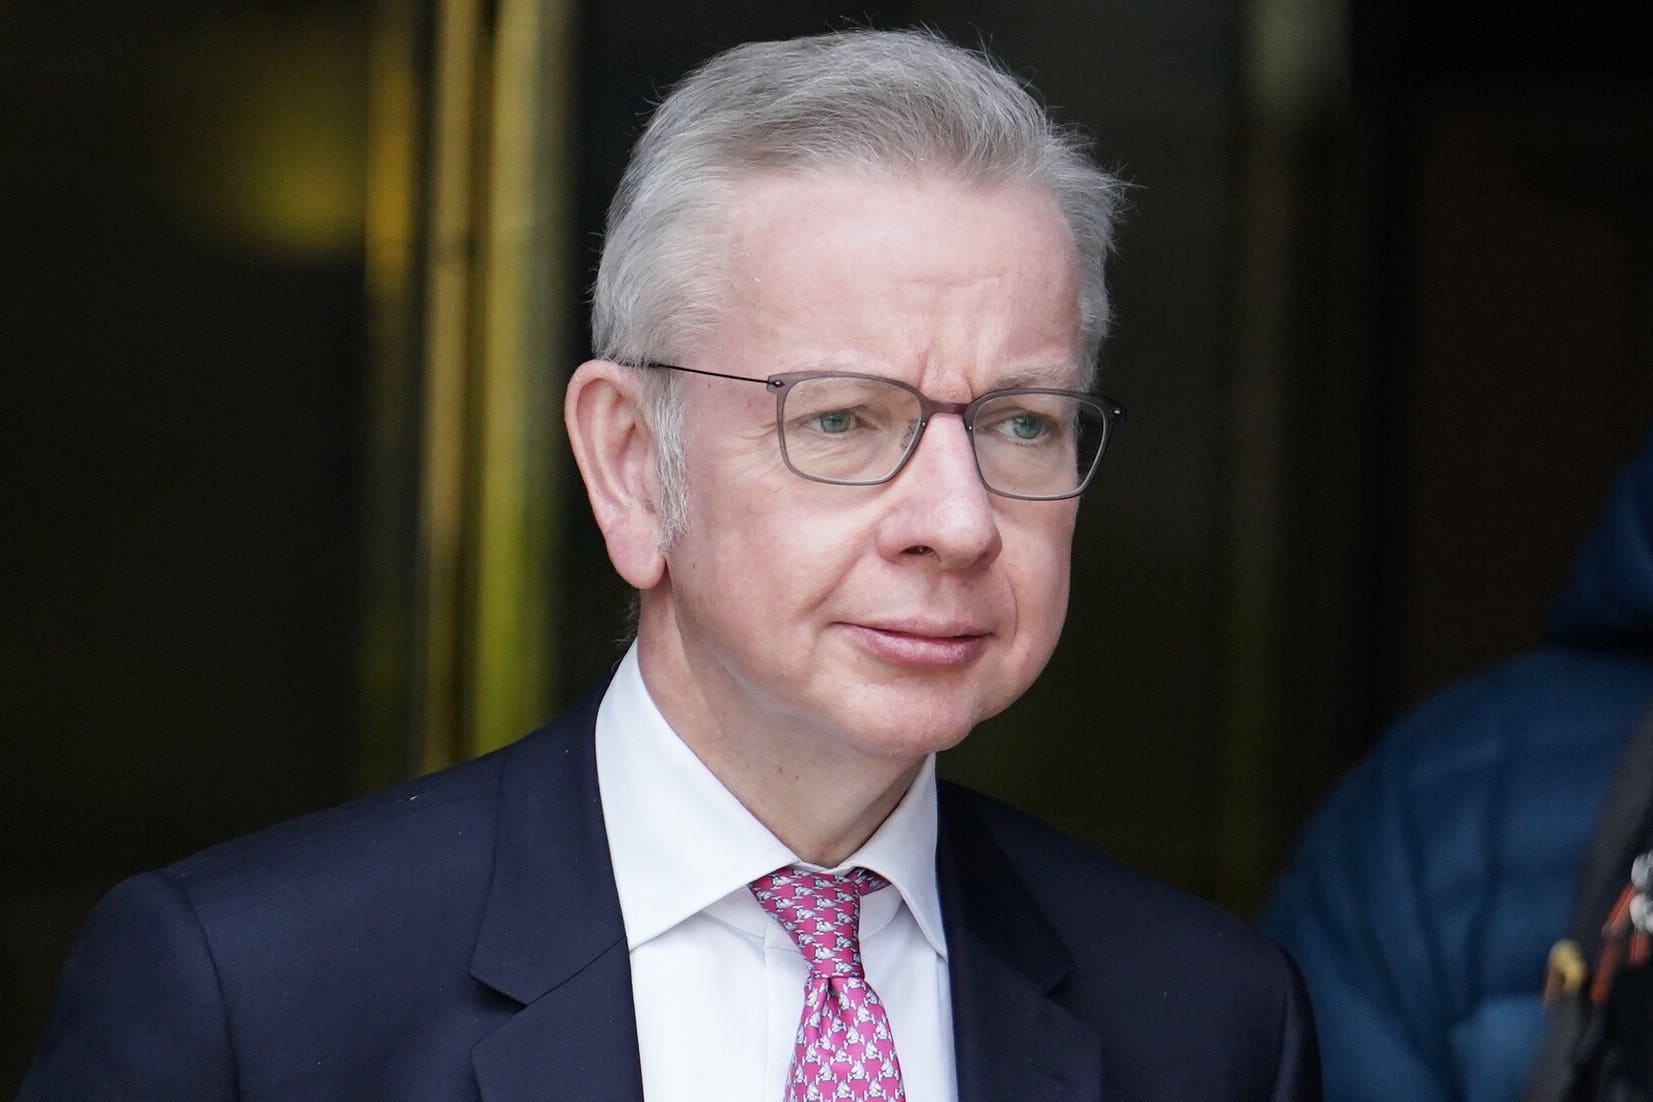 Housing minister Michael Gove’s department is sponsoring the Renters (Reform) bill